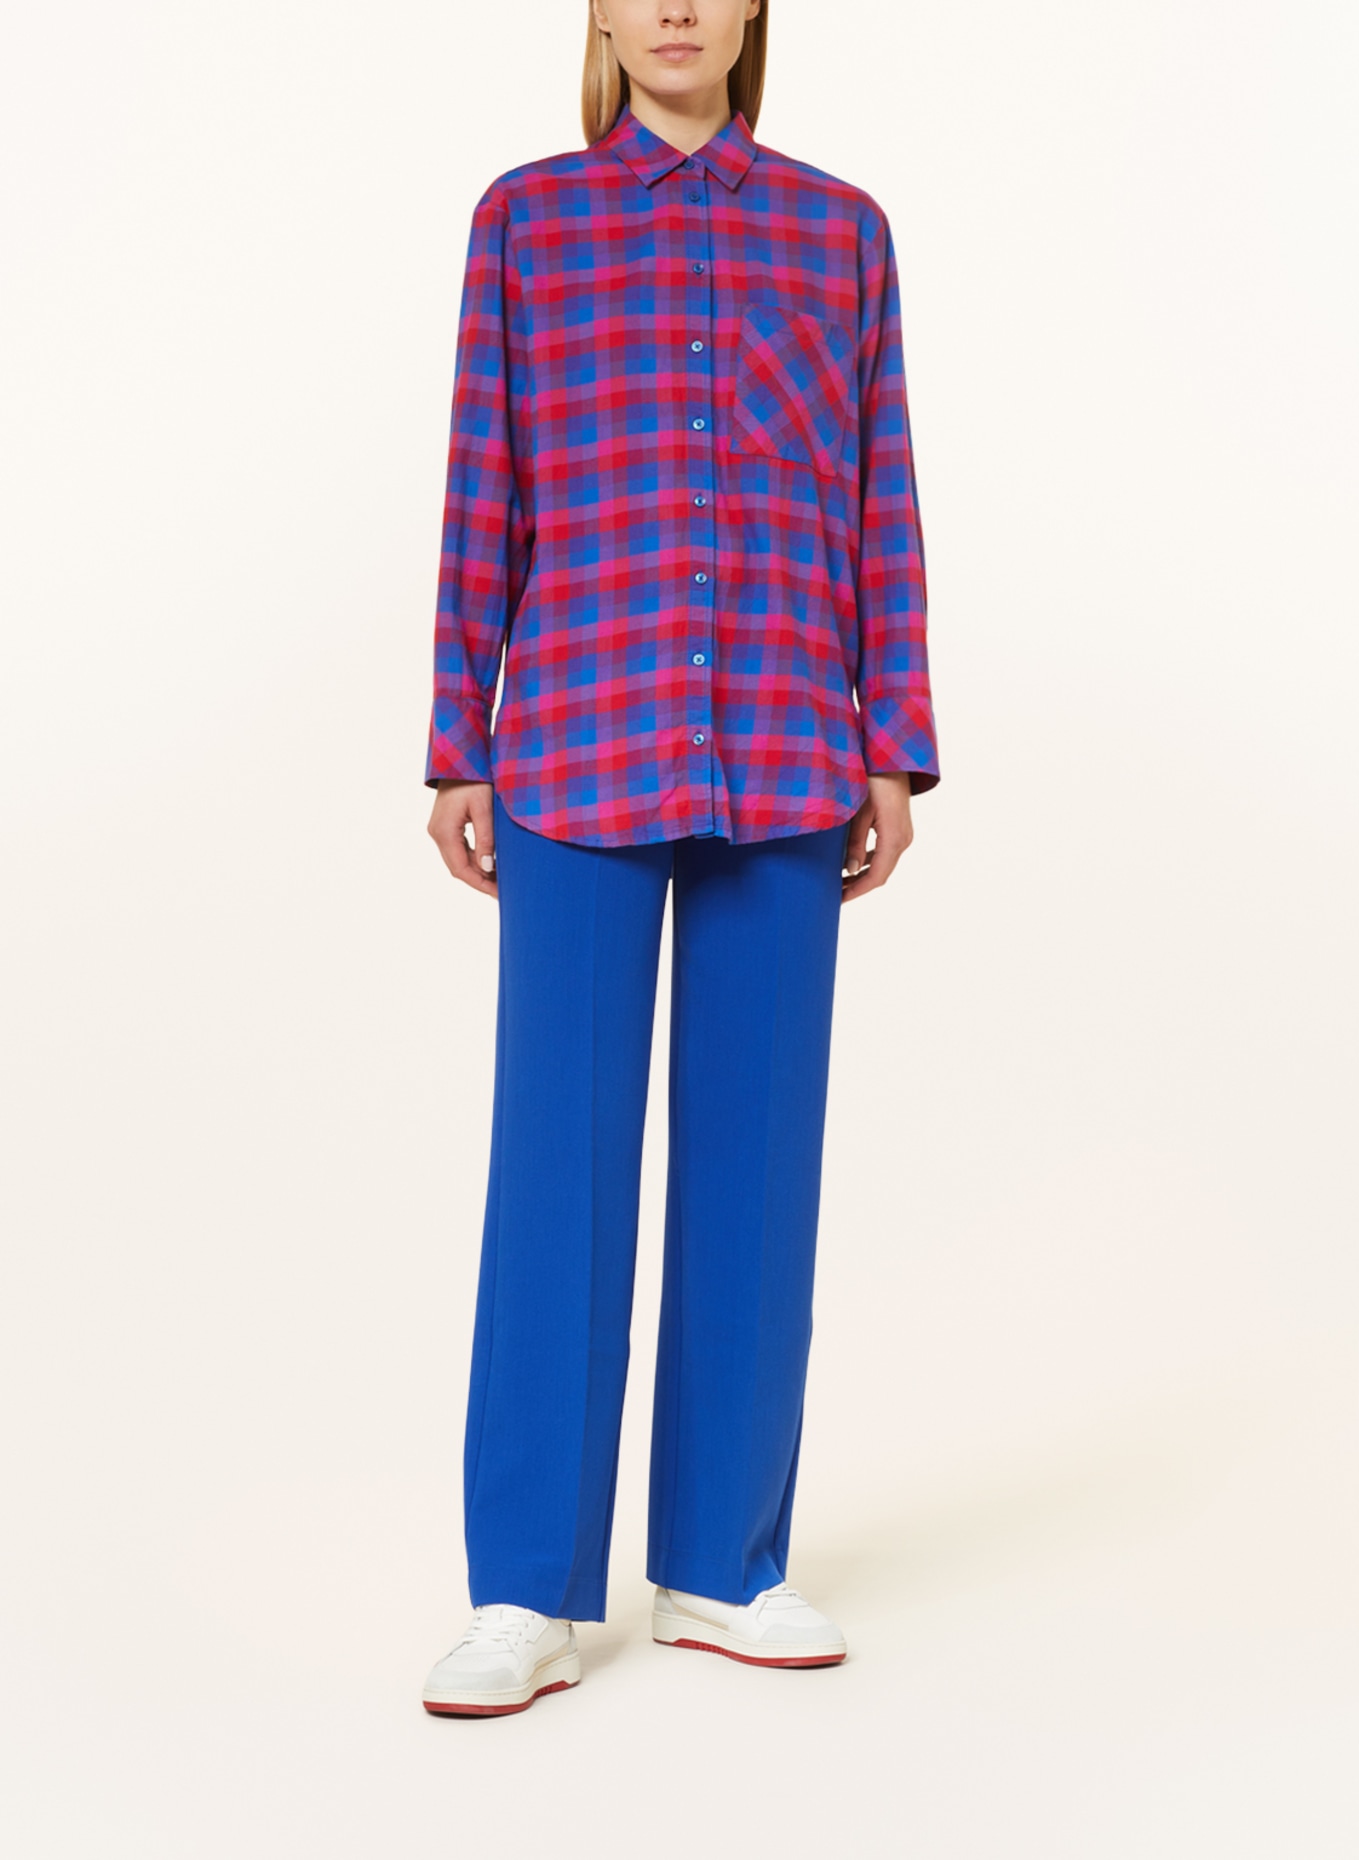 RISY & JERFS Shirt blouse LUCCA, Color: BLUE/ RED/ PINK (Image 2)